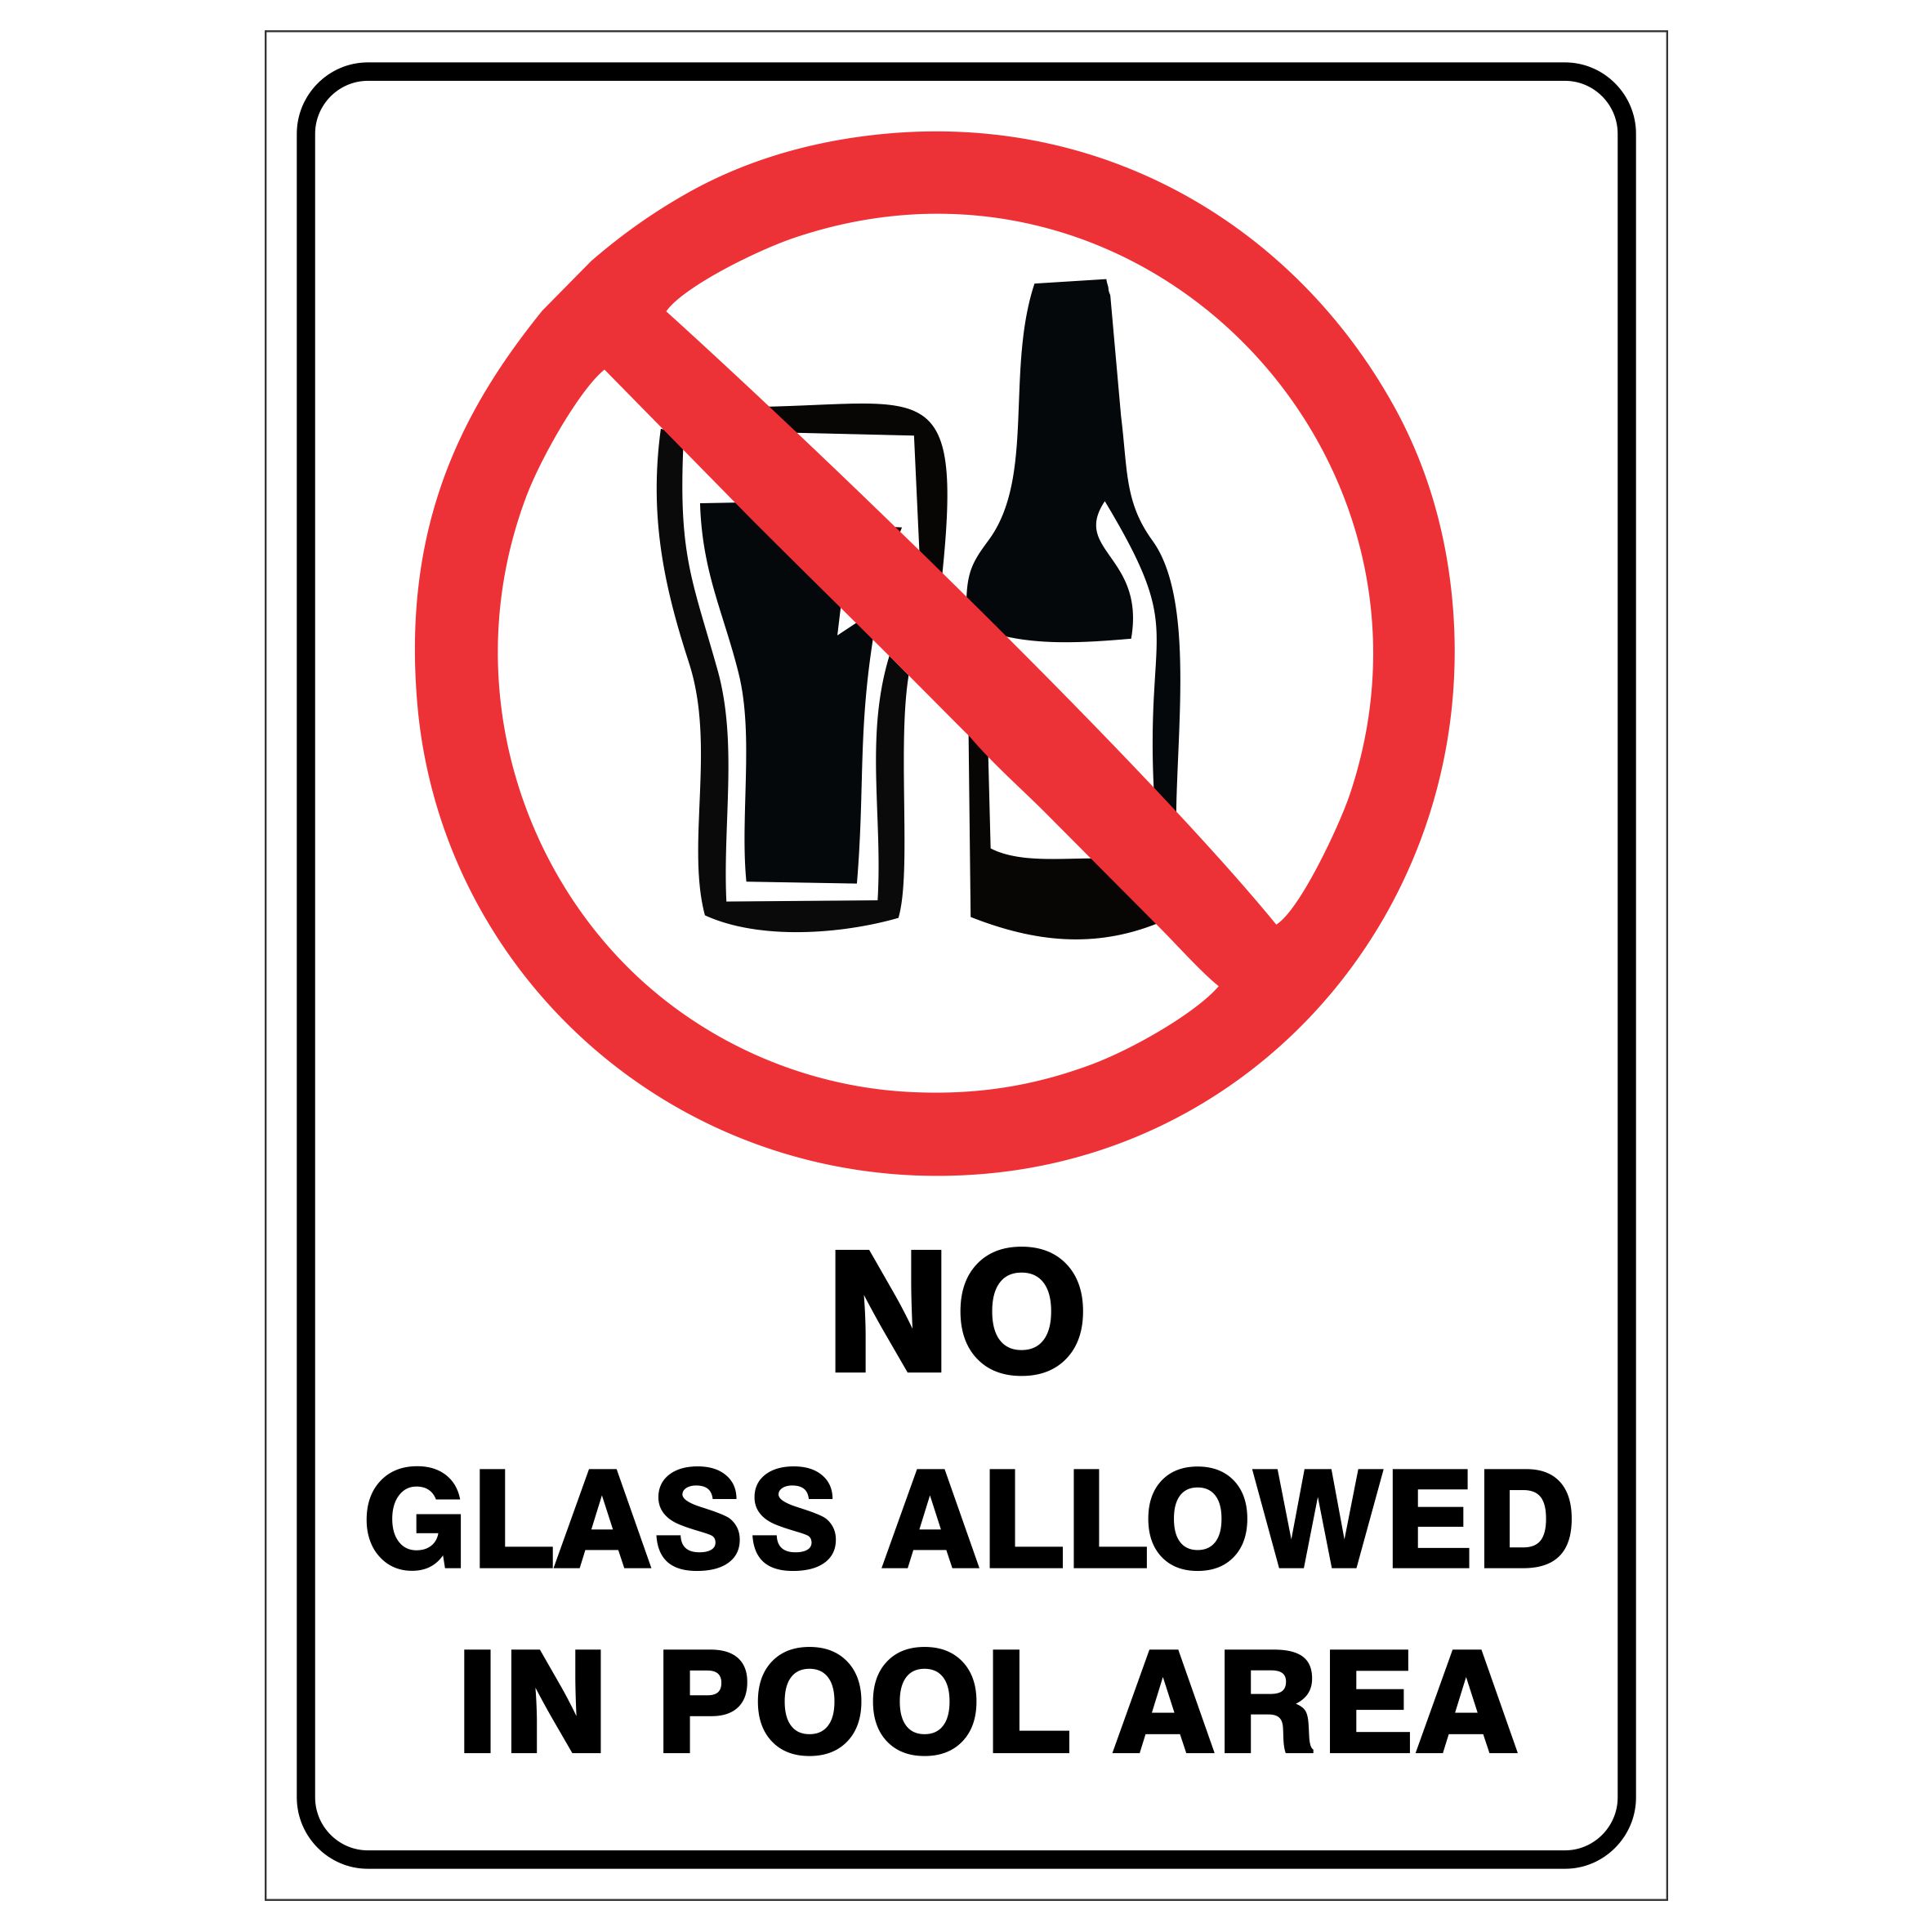 no glass allowed in pool area.